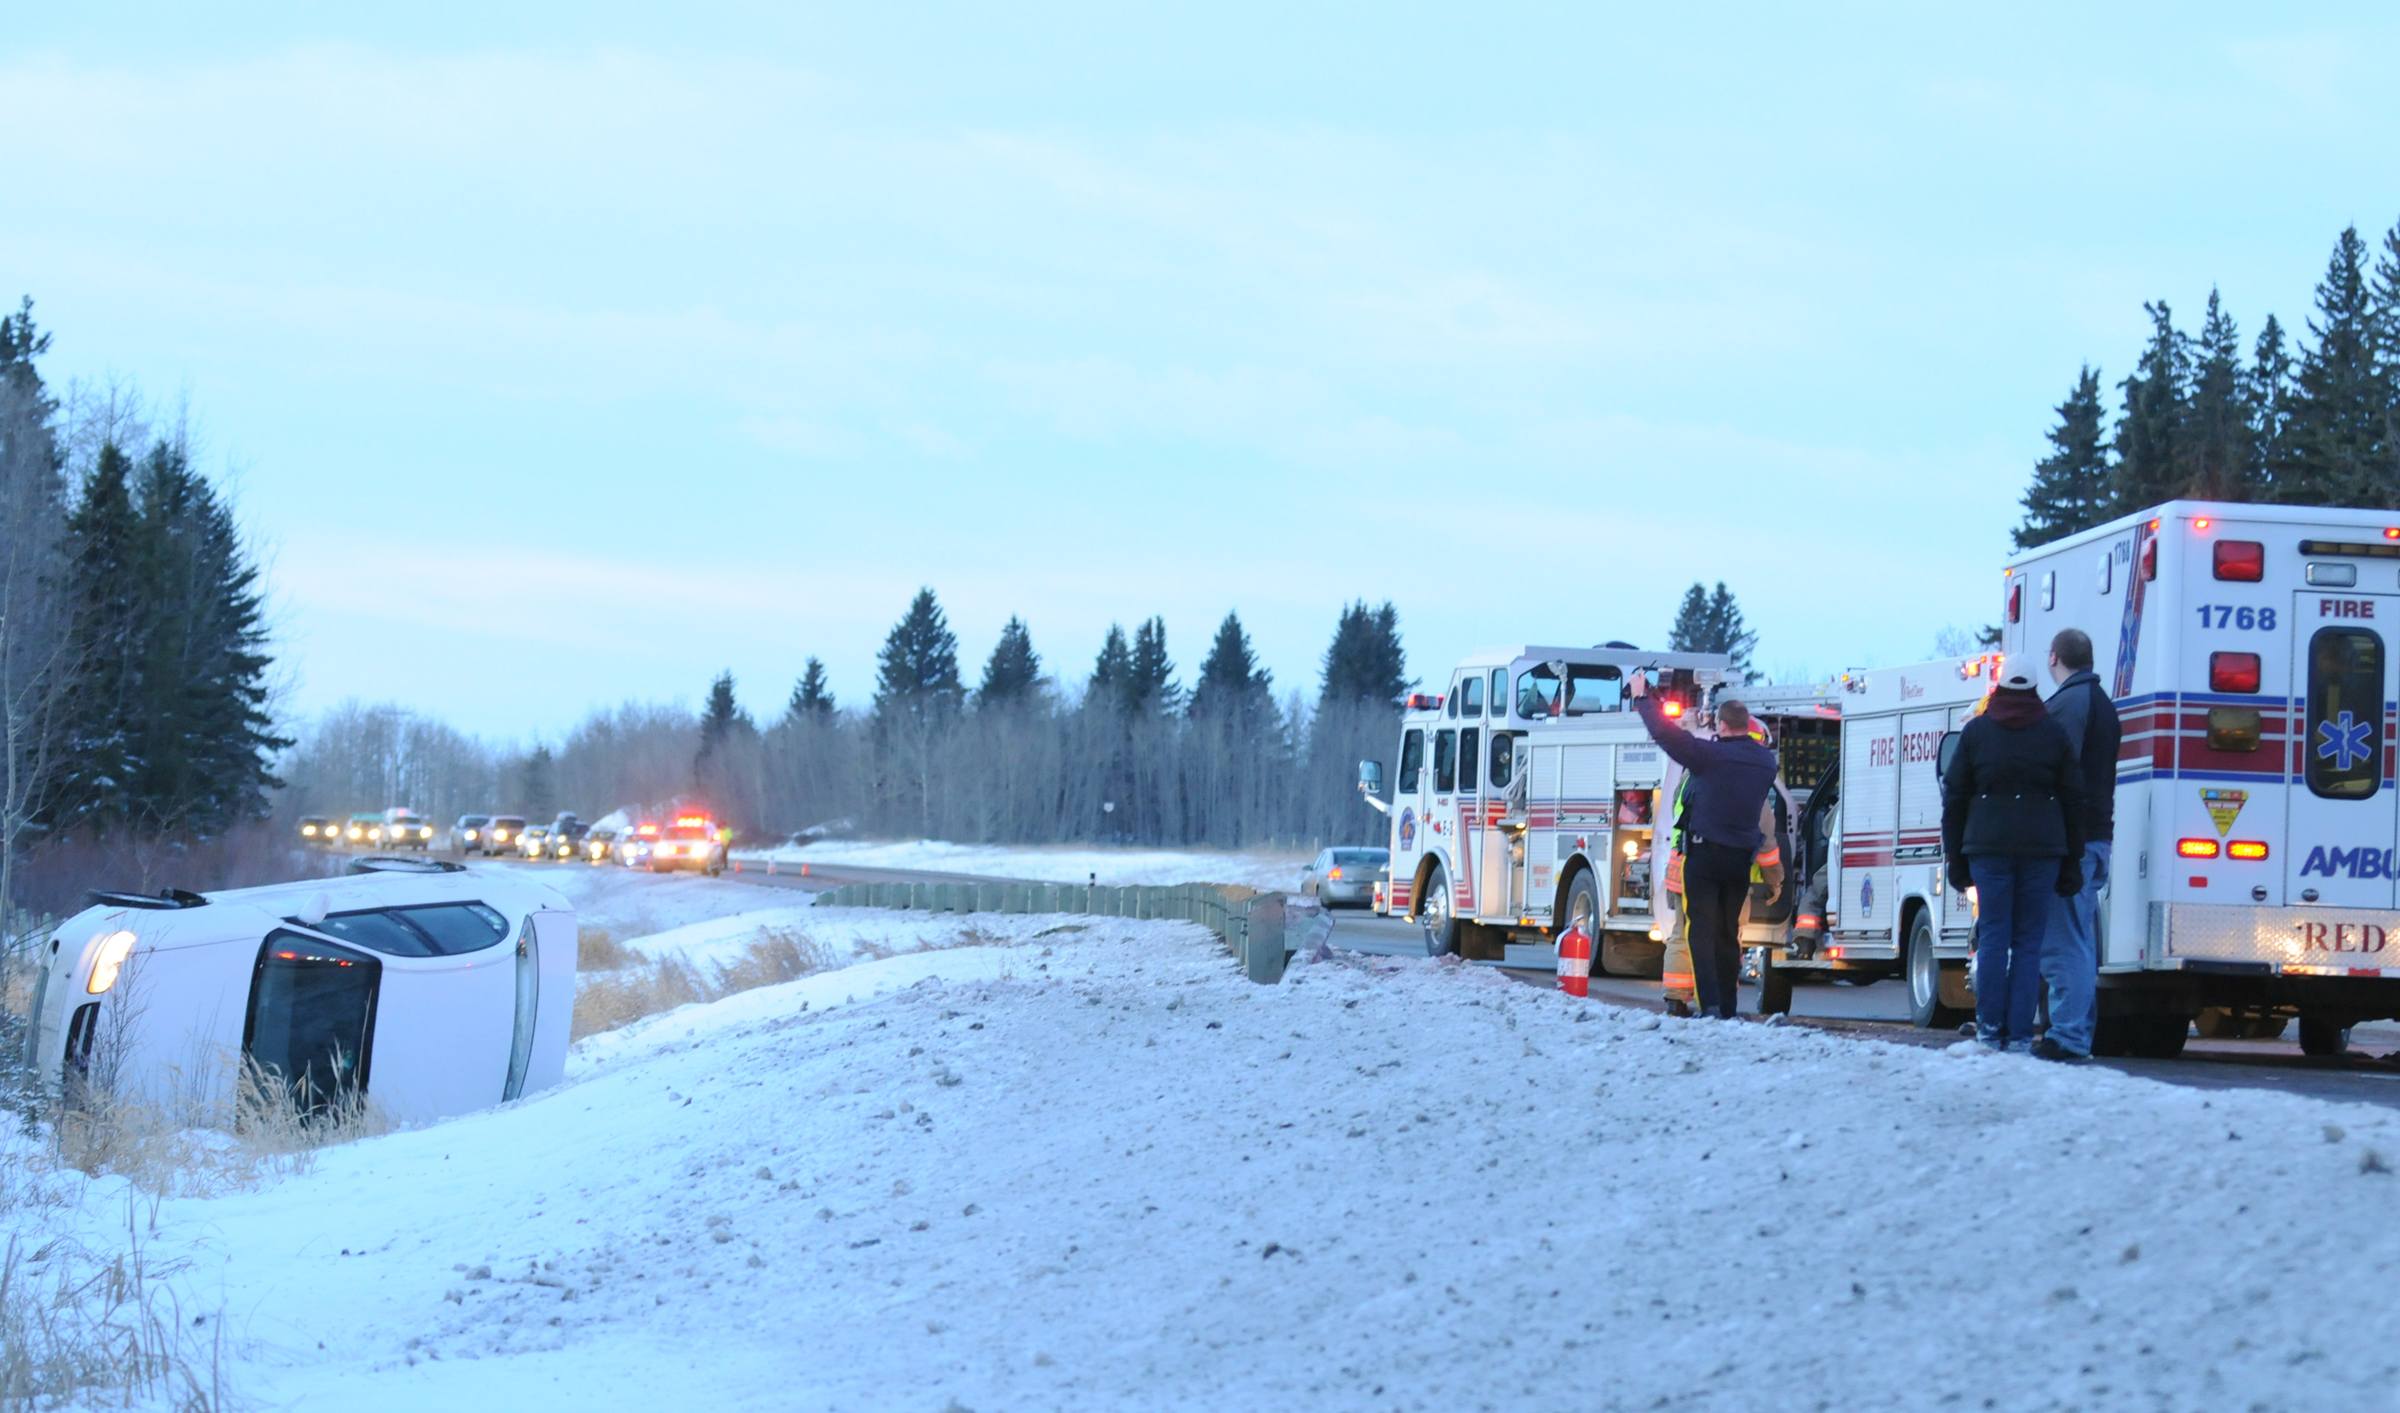 ROLLOVER- Red Deer Emergency Service crews were called out to a rollover on Hwy 2A just south of the City early Thursday morning. No one was injured but an investigation is still ongoing.